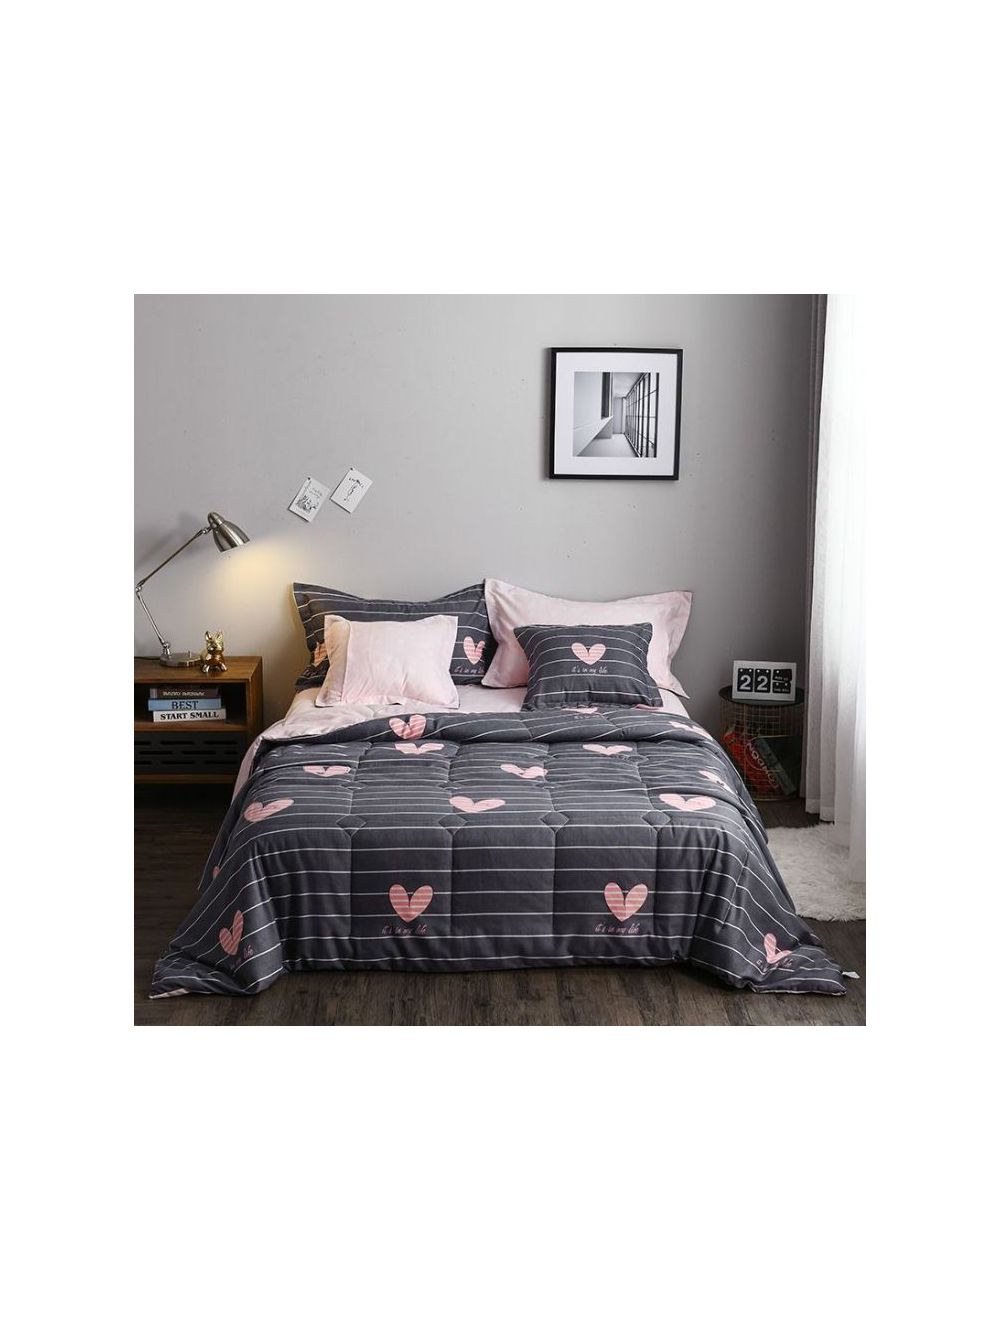 Rishahome 6 Piece Comforter Set (1 comforter+1 fitted sheet+ 2 Large pillow cases+2 medium pillow cases) Microfibre Pink Love King-PLKMH/06/70